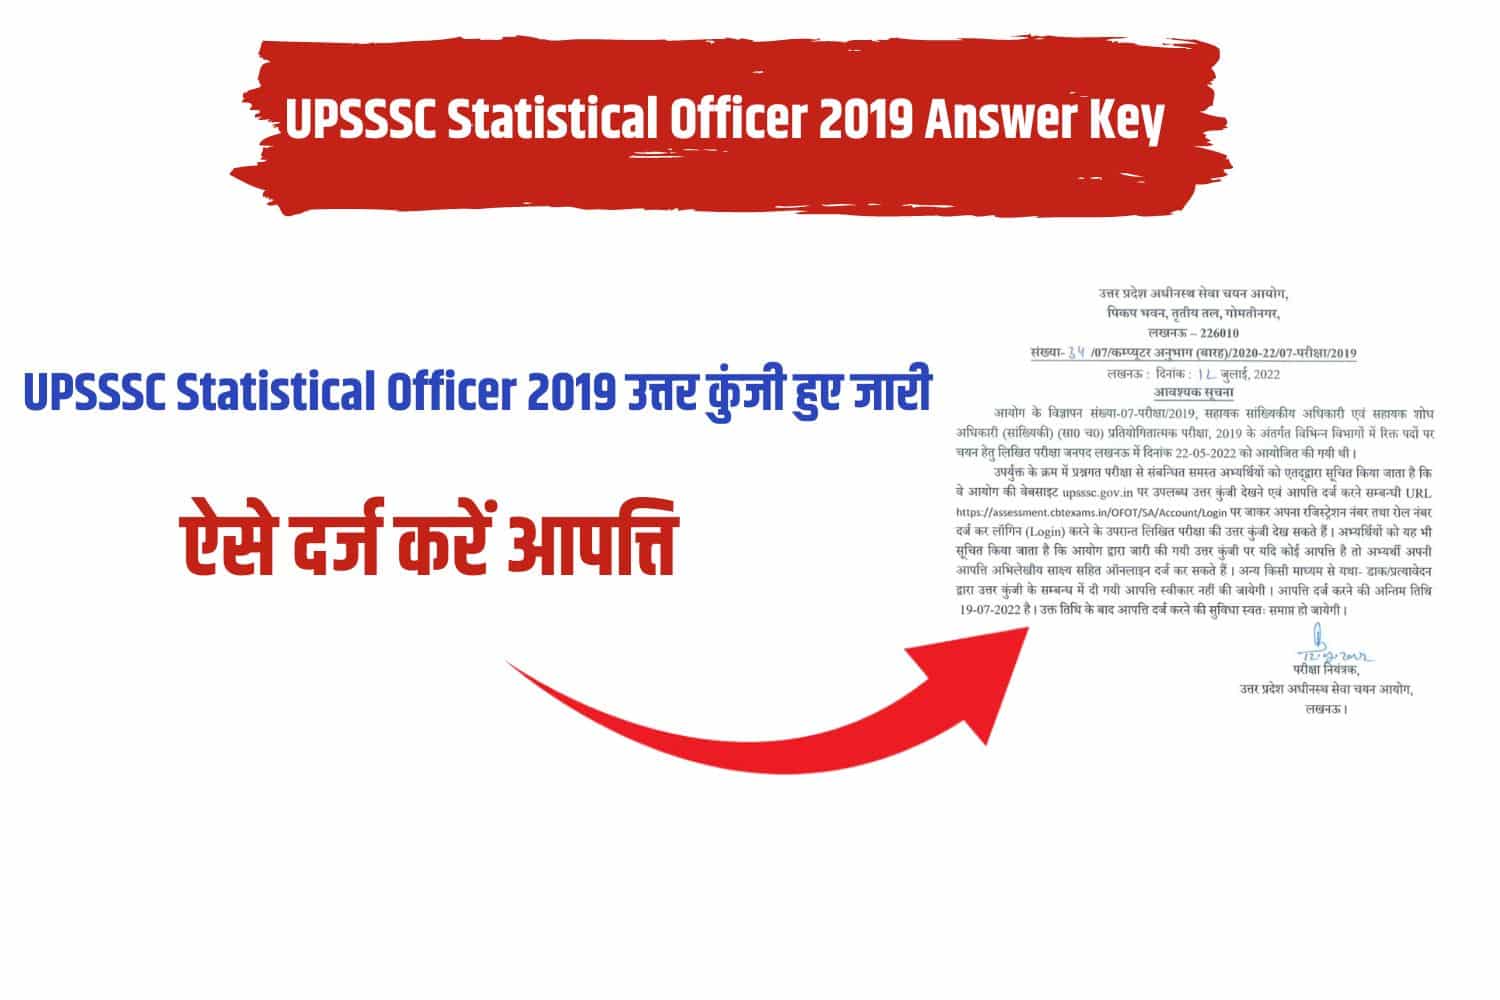 UPSSSC Statistical Officer Reviesd 2019 Answer Key